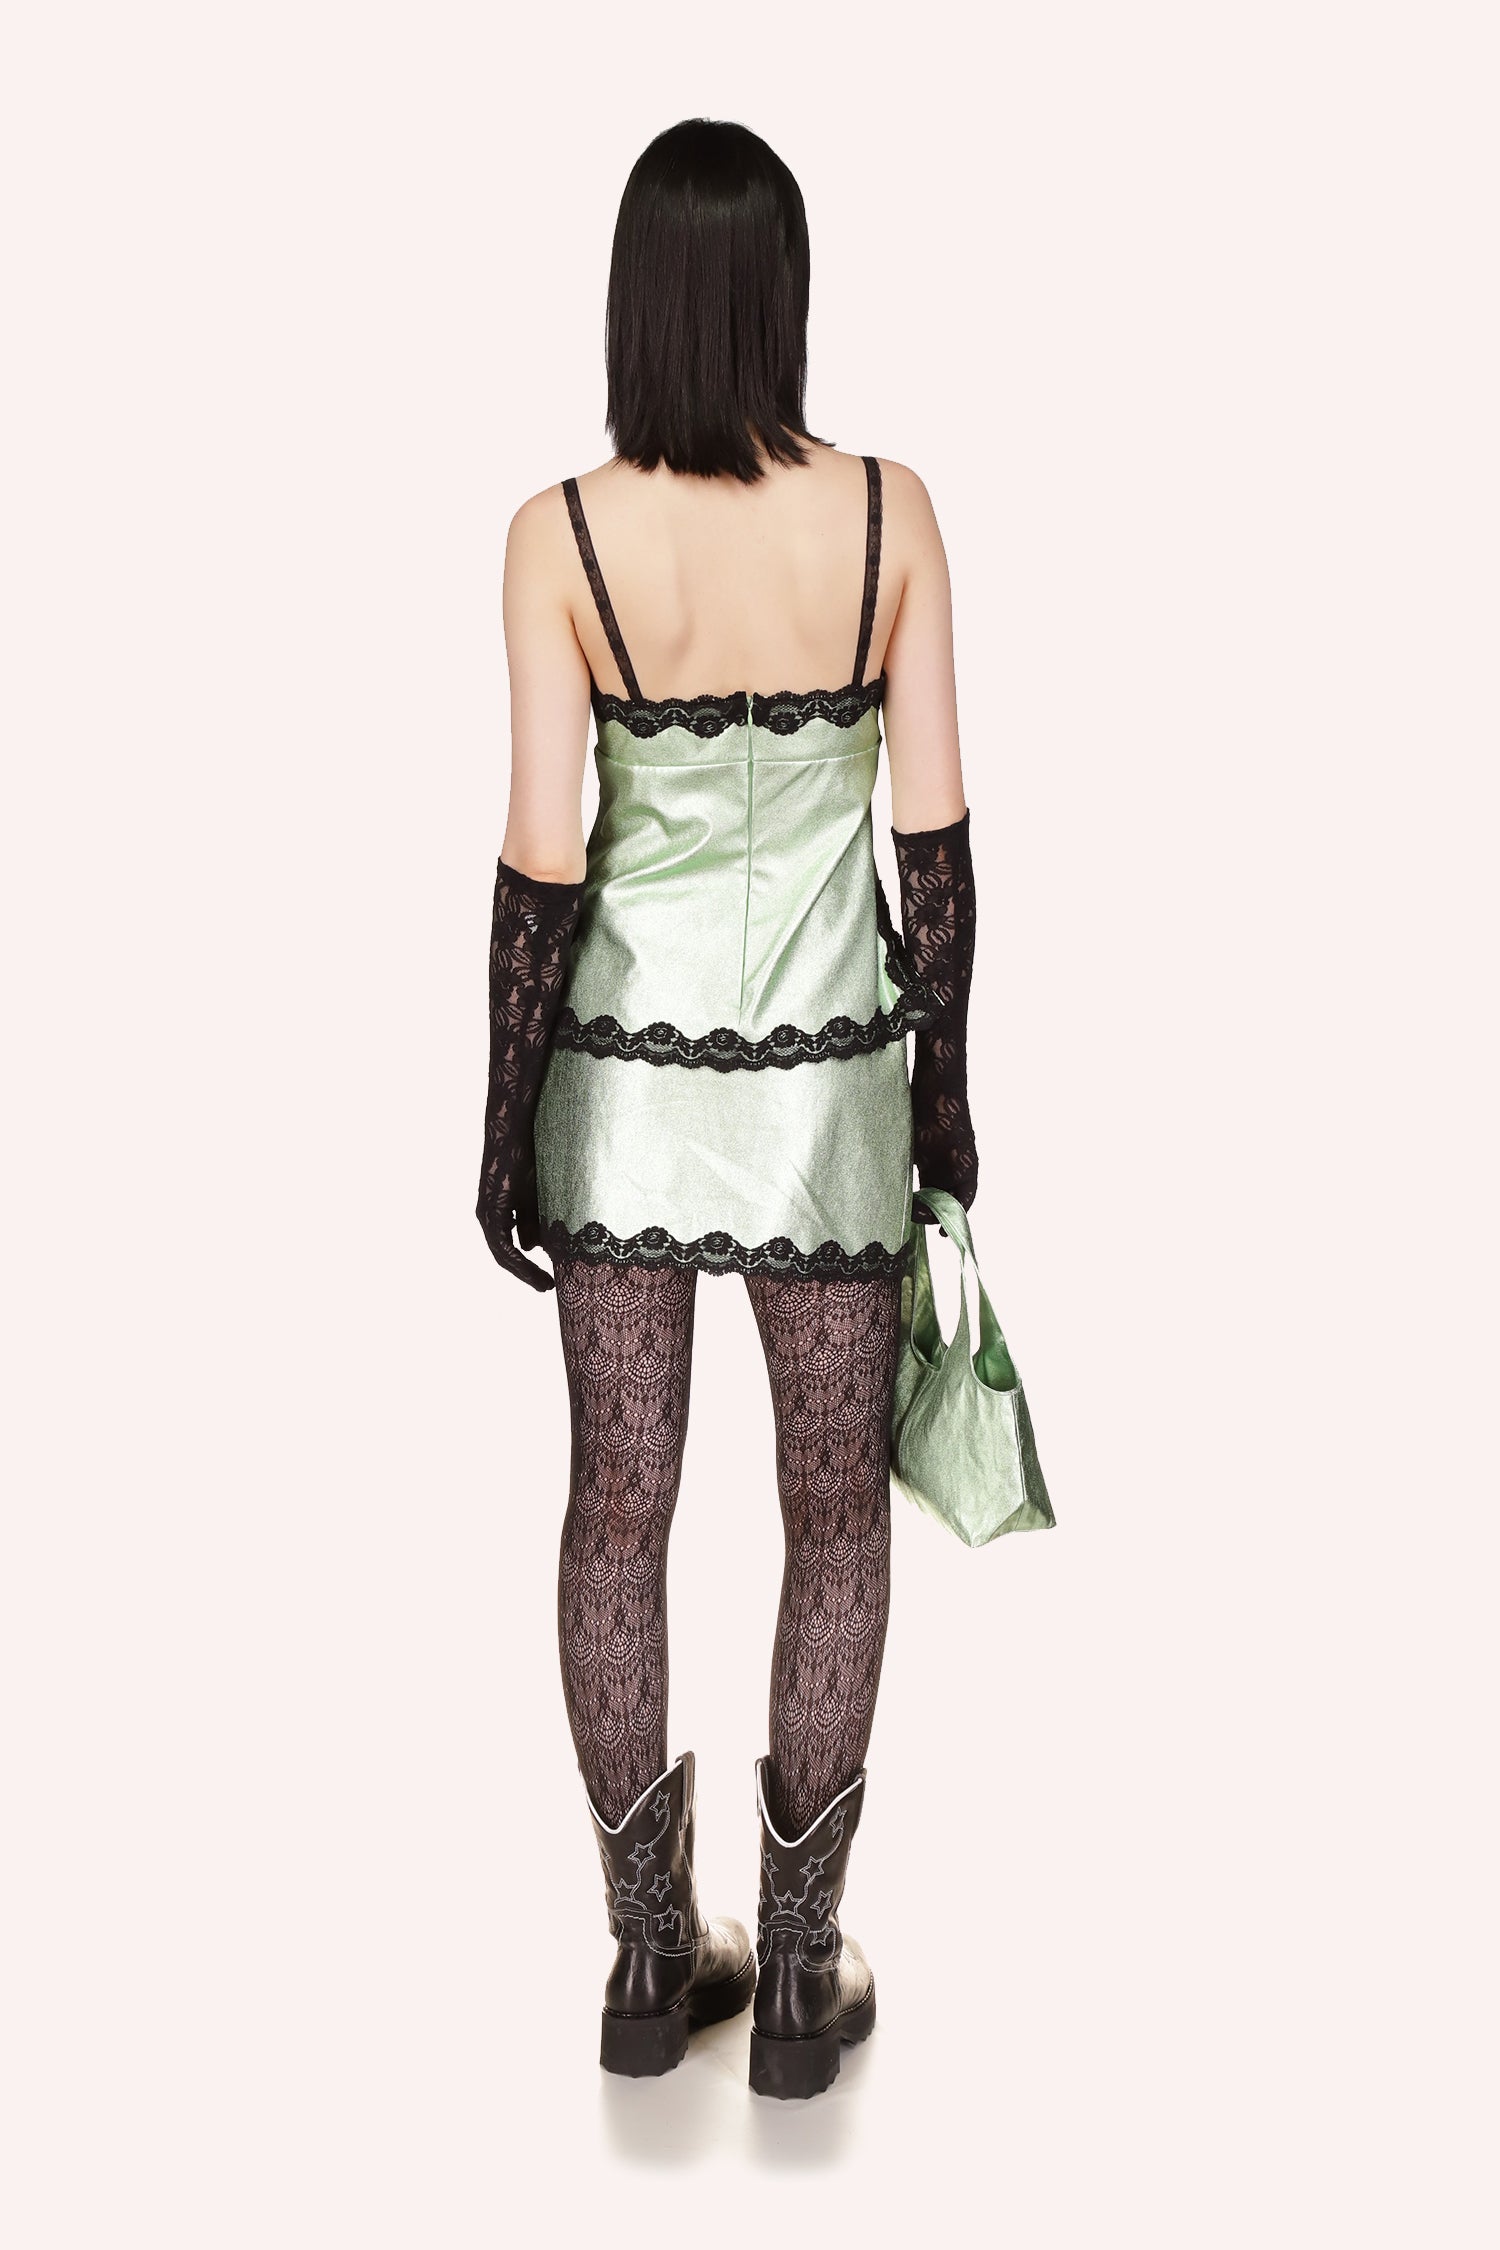 Mini Skirt Peppermint, black lace on the edges, cut with lace design over each tights to the middle of the skirt